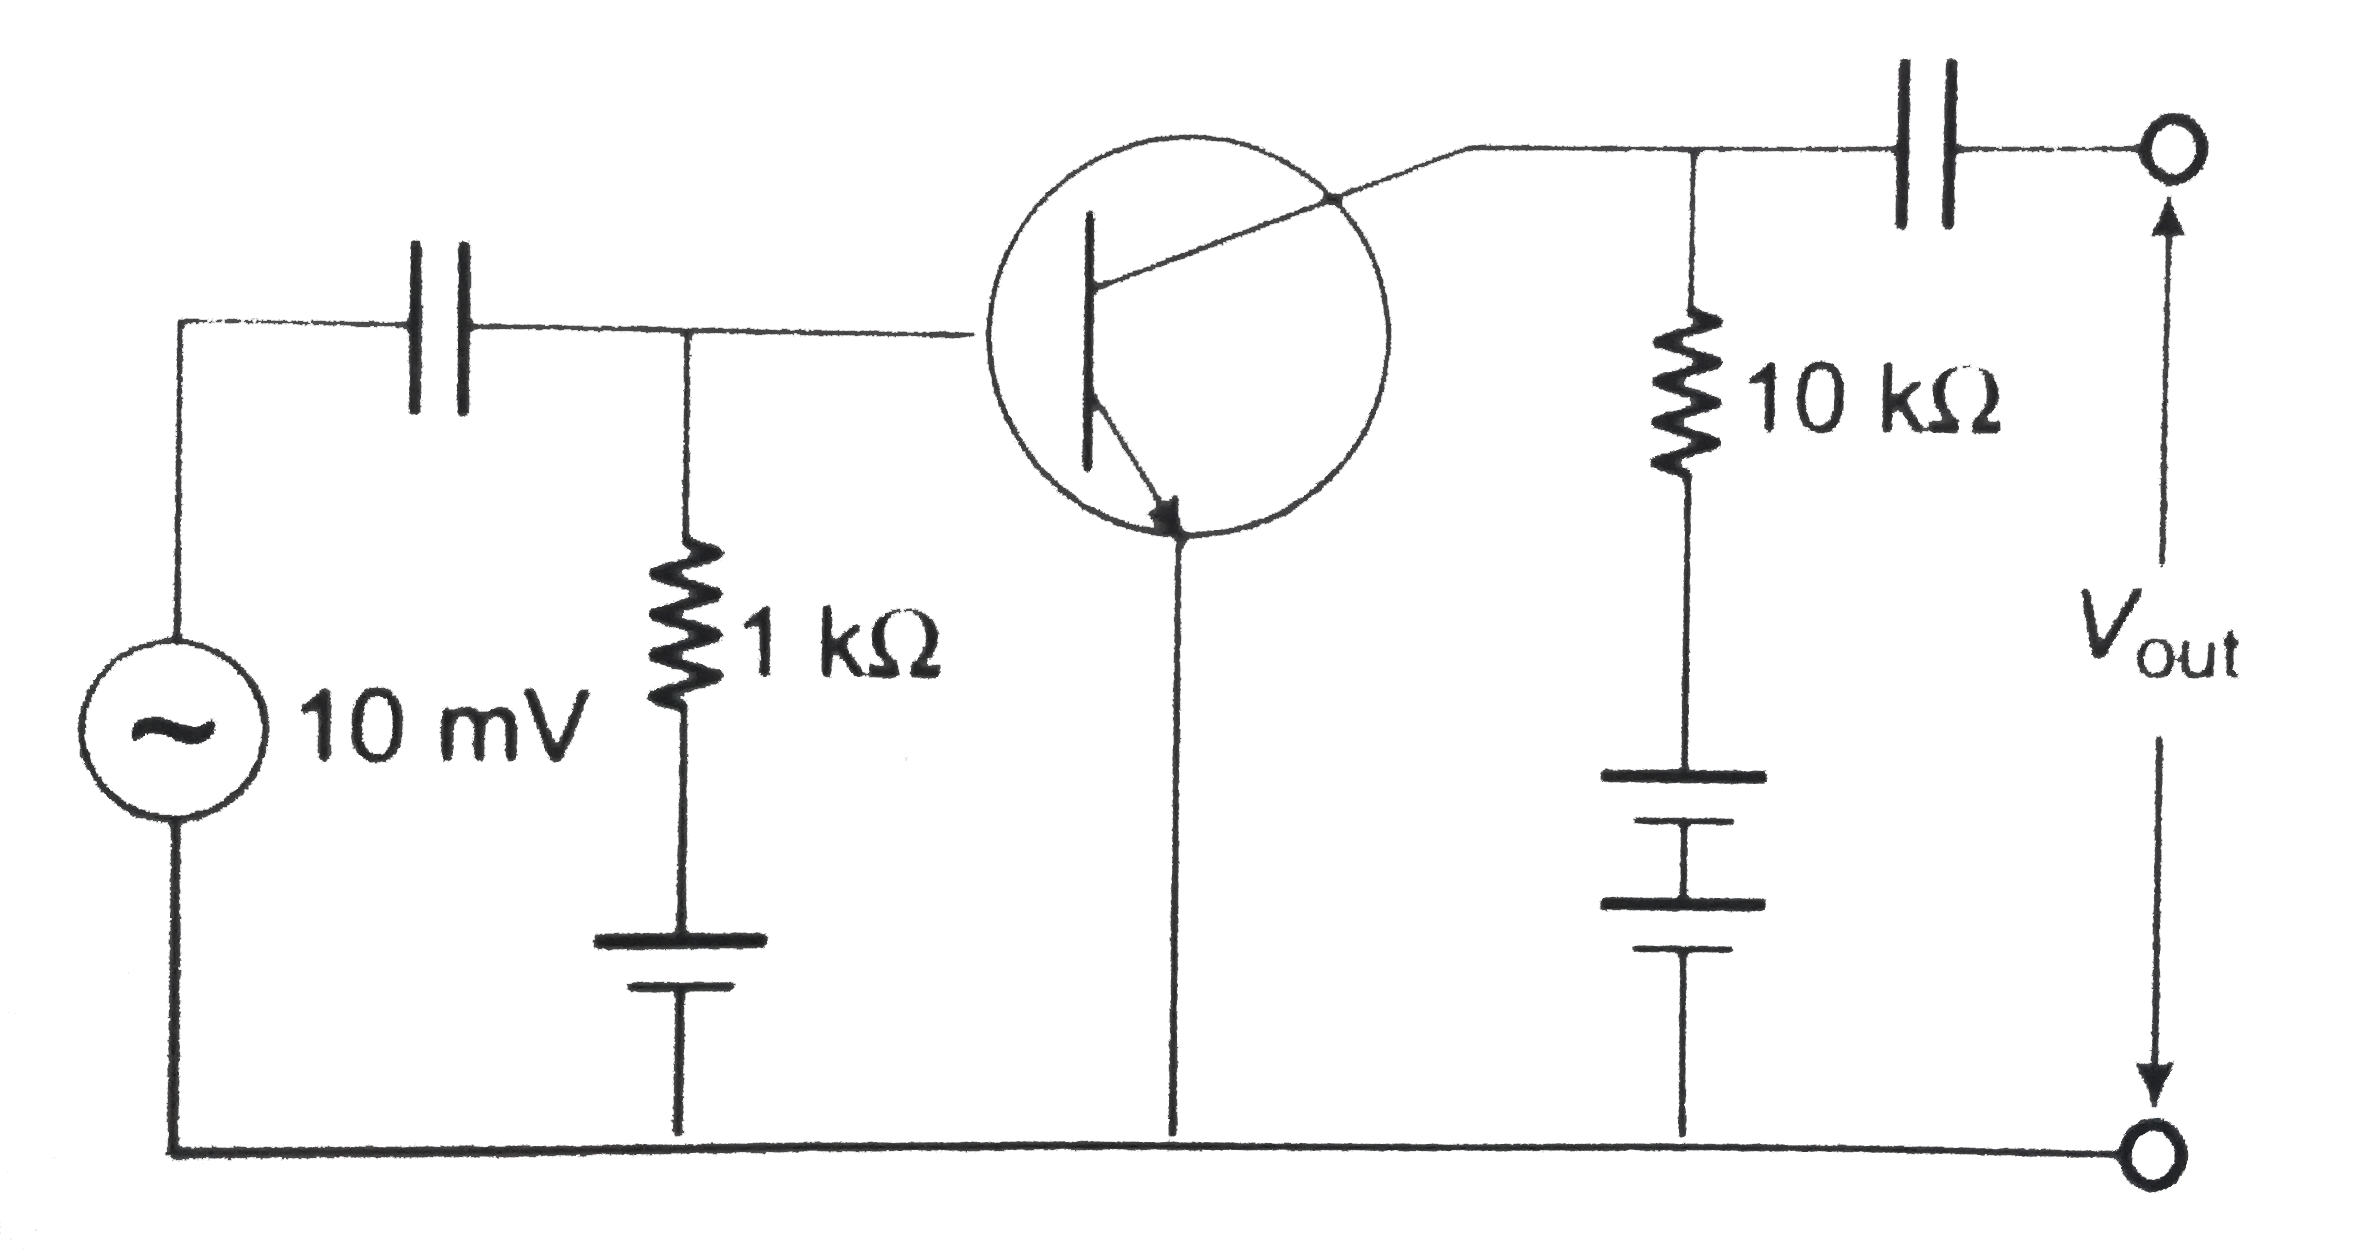 In the following common emitter configuration an NPN transistor with current gain beta=100 is used. The output voltage of the amlifier will be